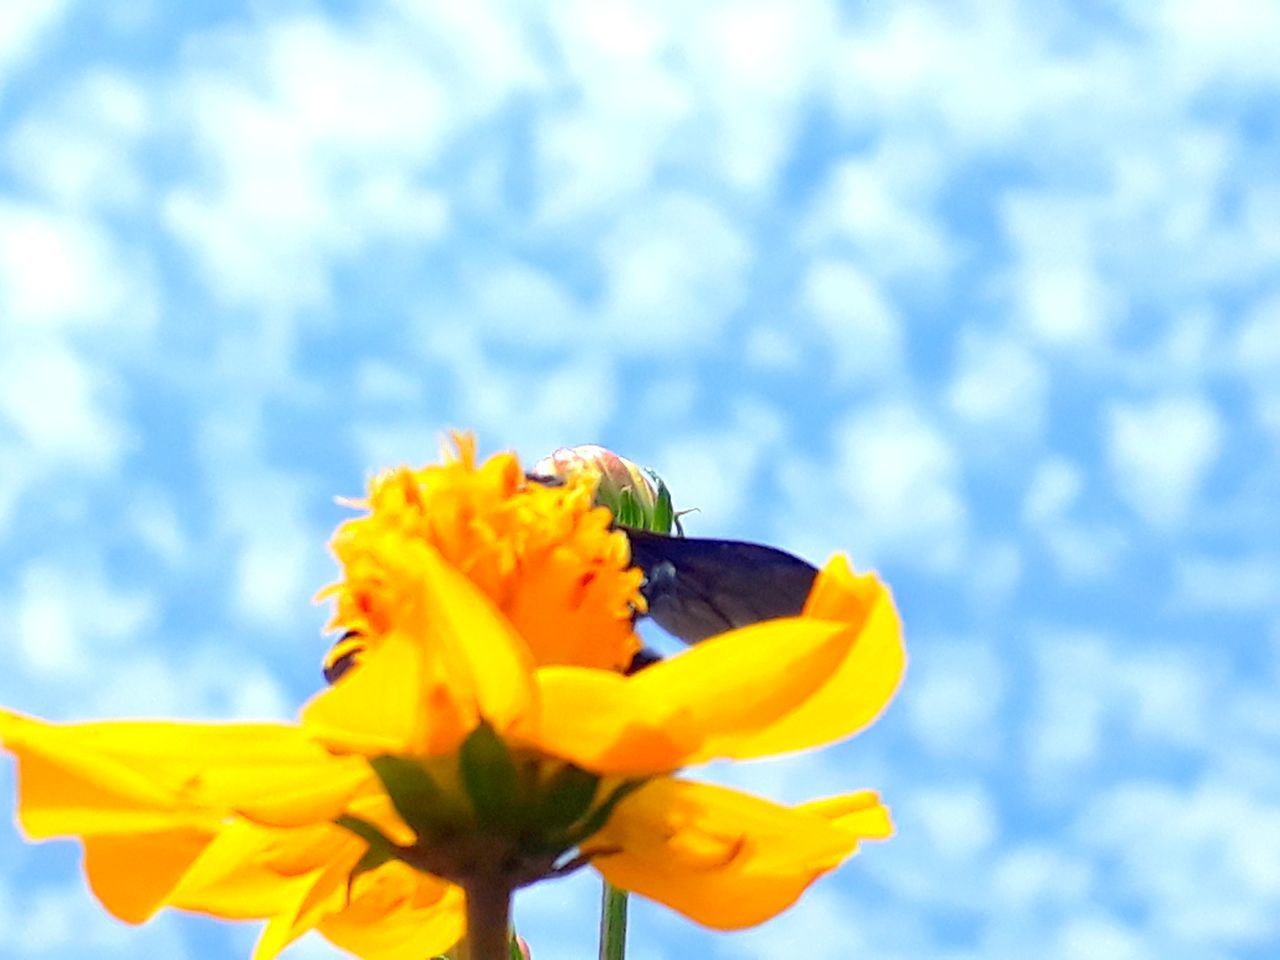 CLOSE-UP OF YELLOW FLOWER AGAINST SKY